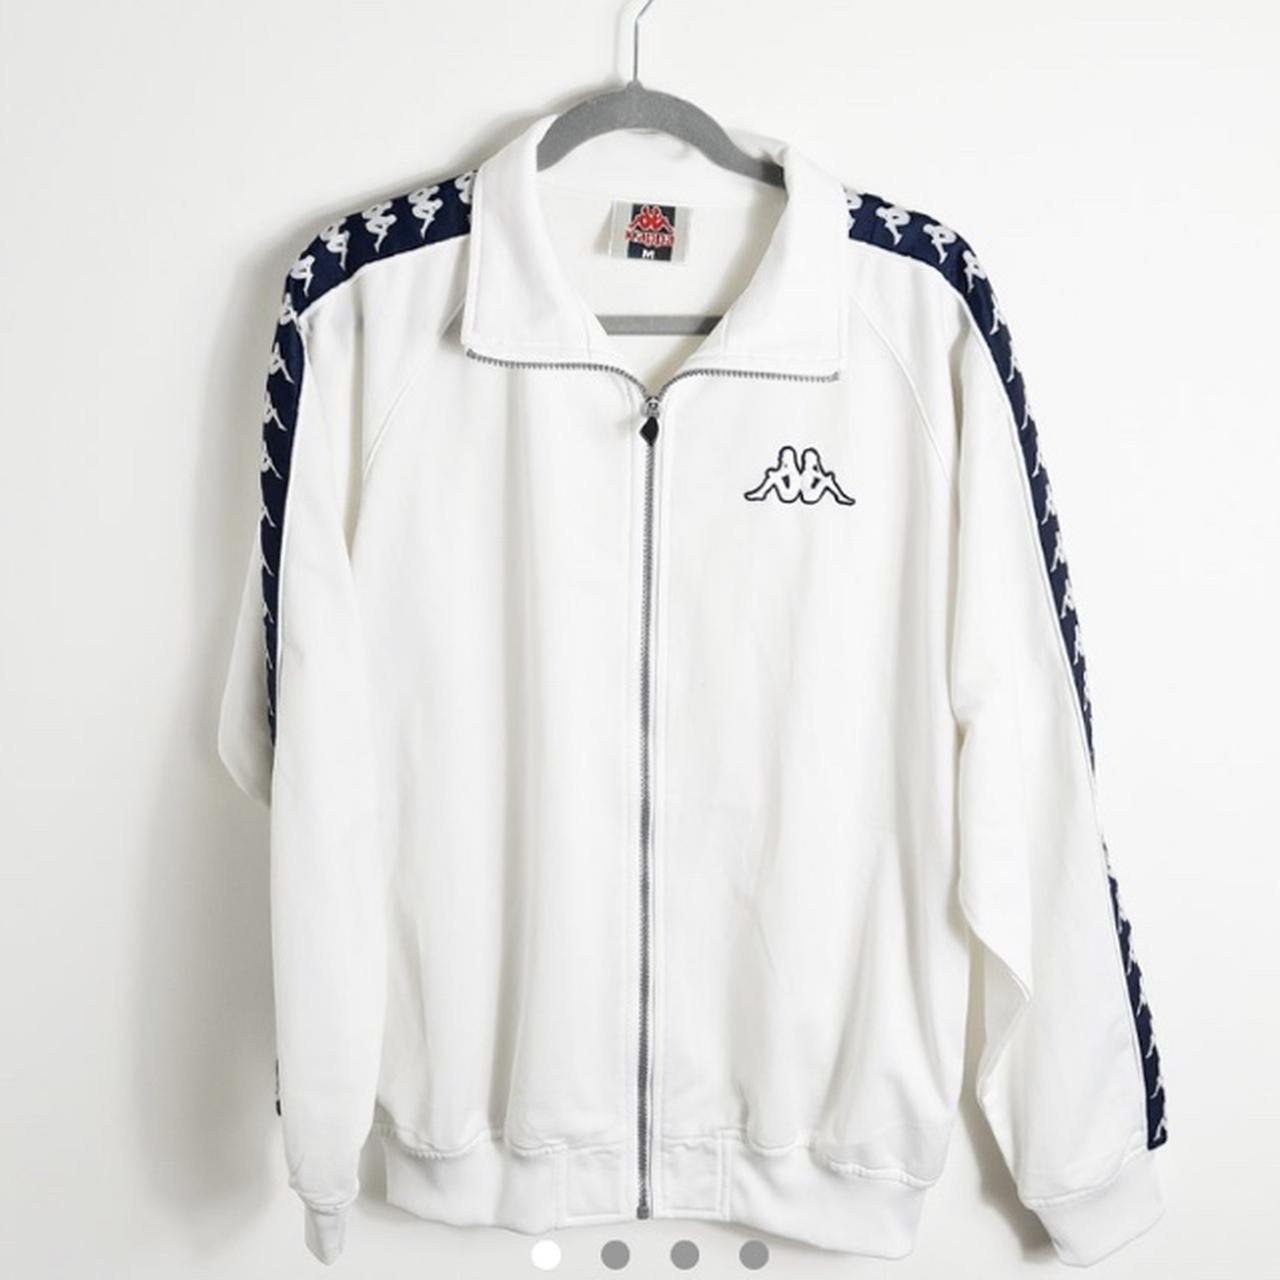 Zip up, white kappa jacket perfect condition Shown... - Depop